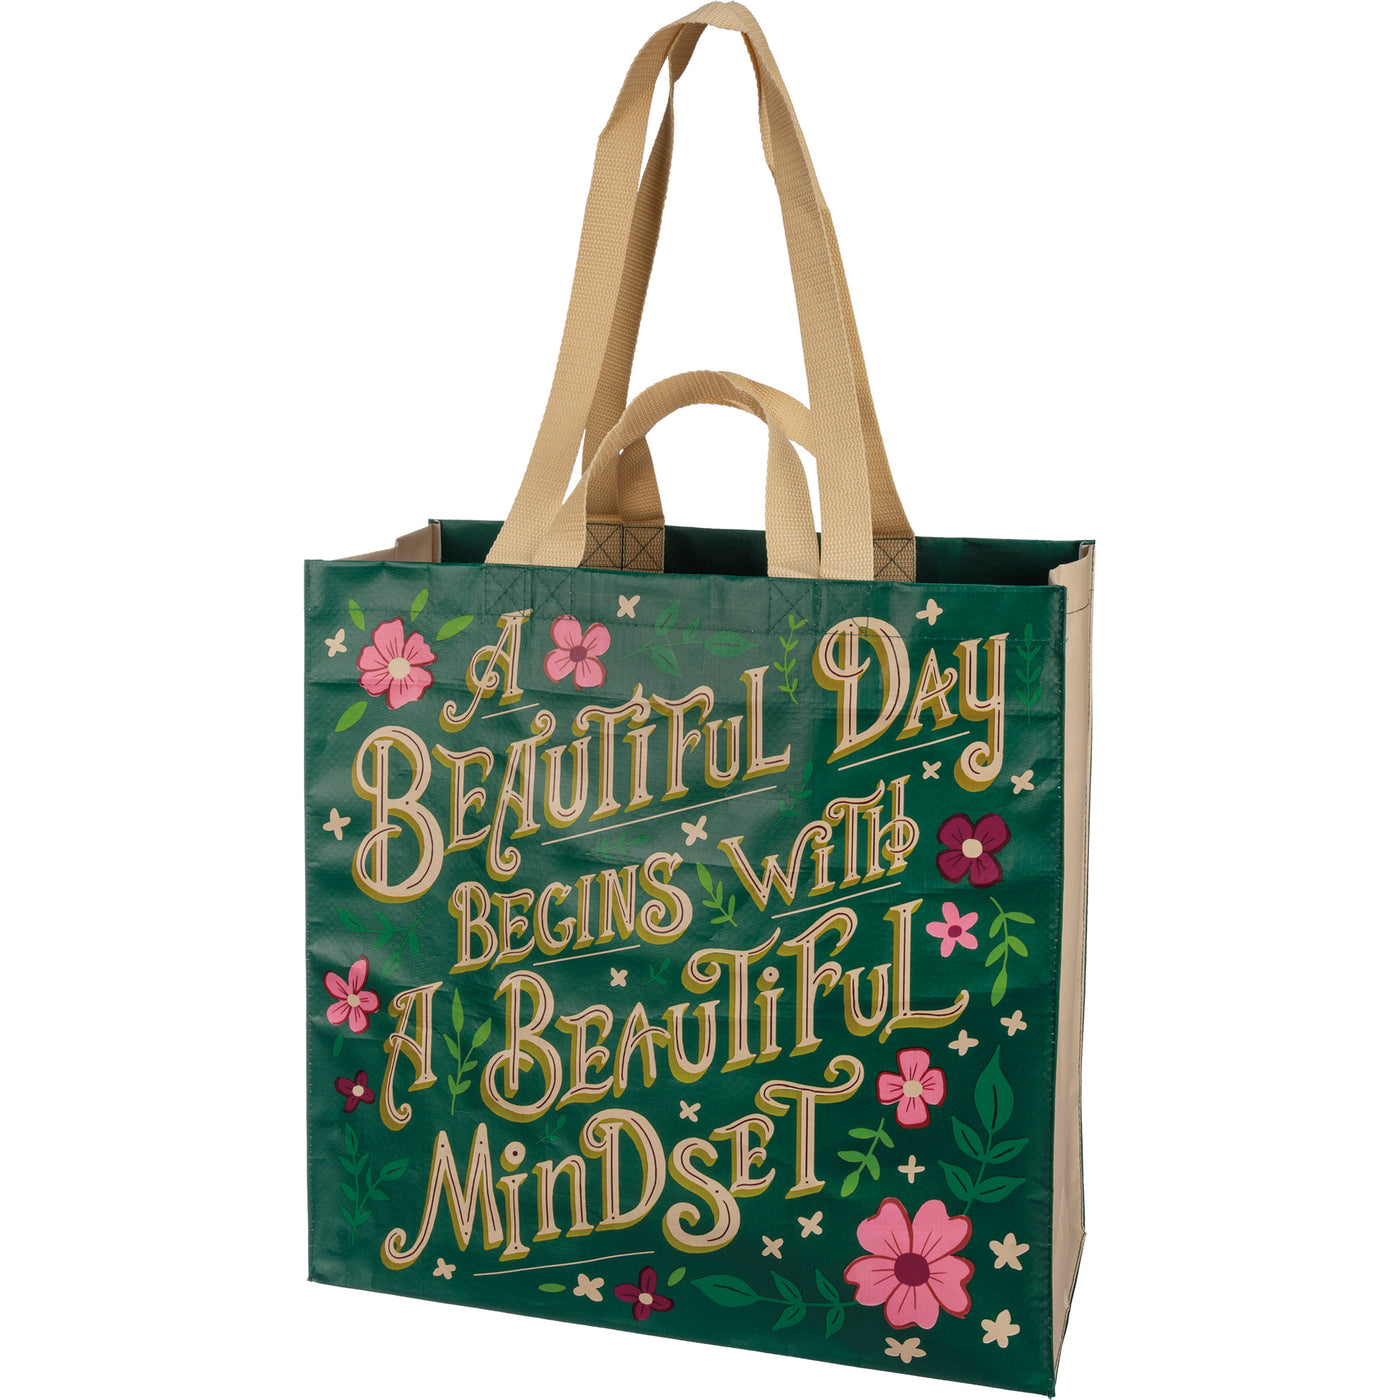 A Beautiful Day Begins With A Beautiful Mindset Market Tote Bag